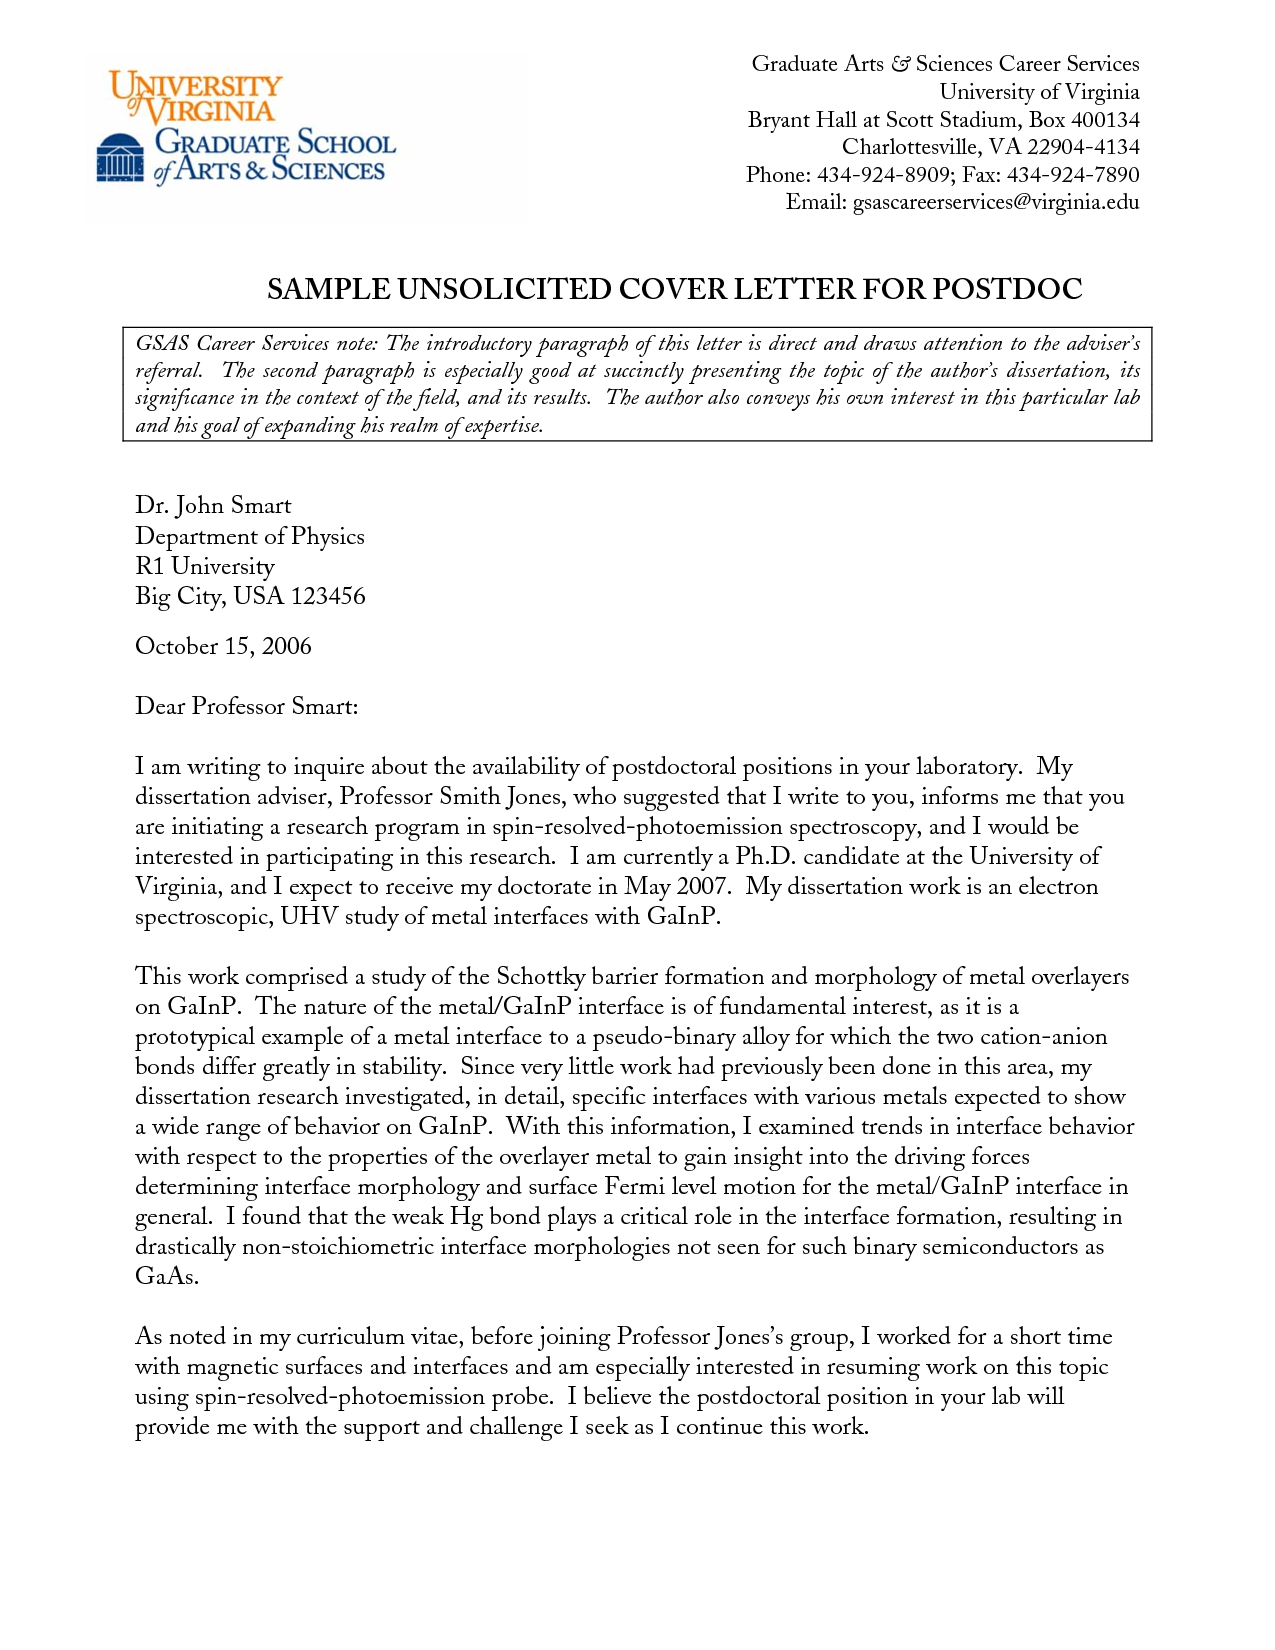 unsolicited cover letter graphic designer